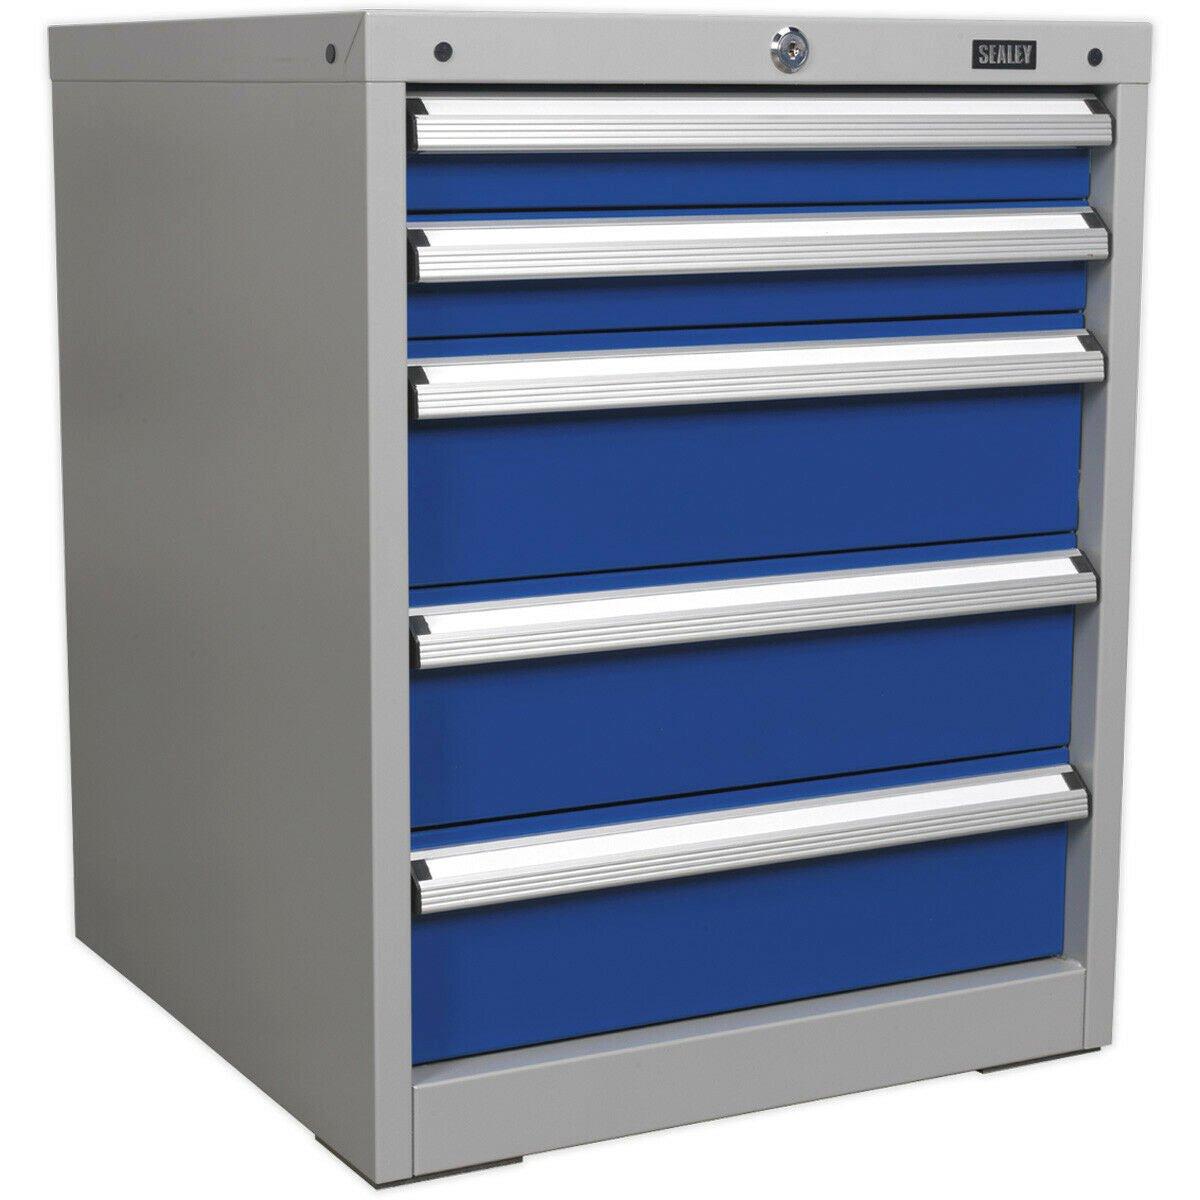 5 Drawer Industrial Cabinet - Heavy Duty Drawer Slides - High Quality Lock